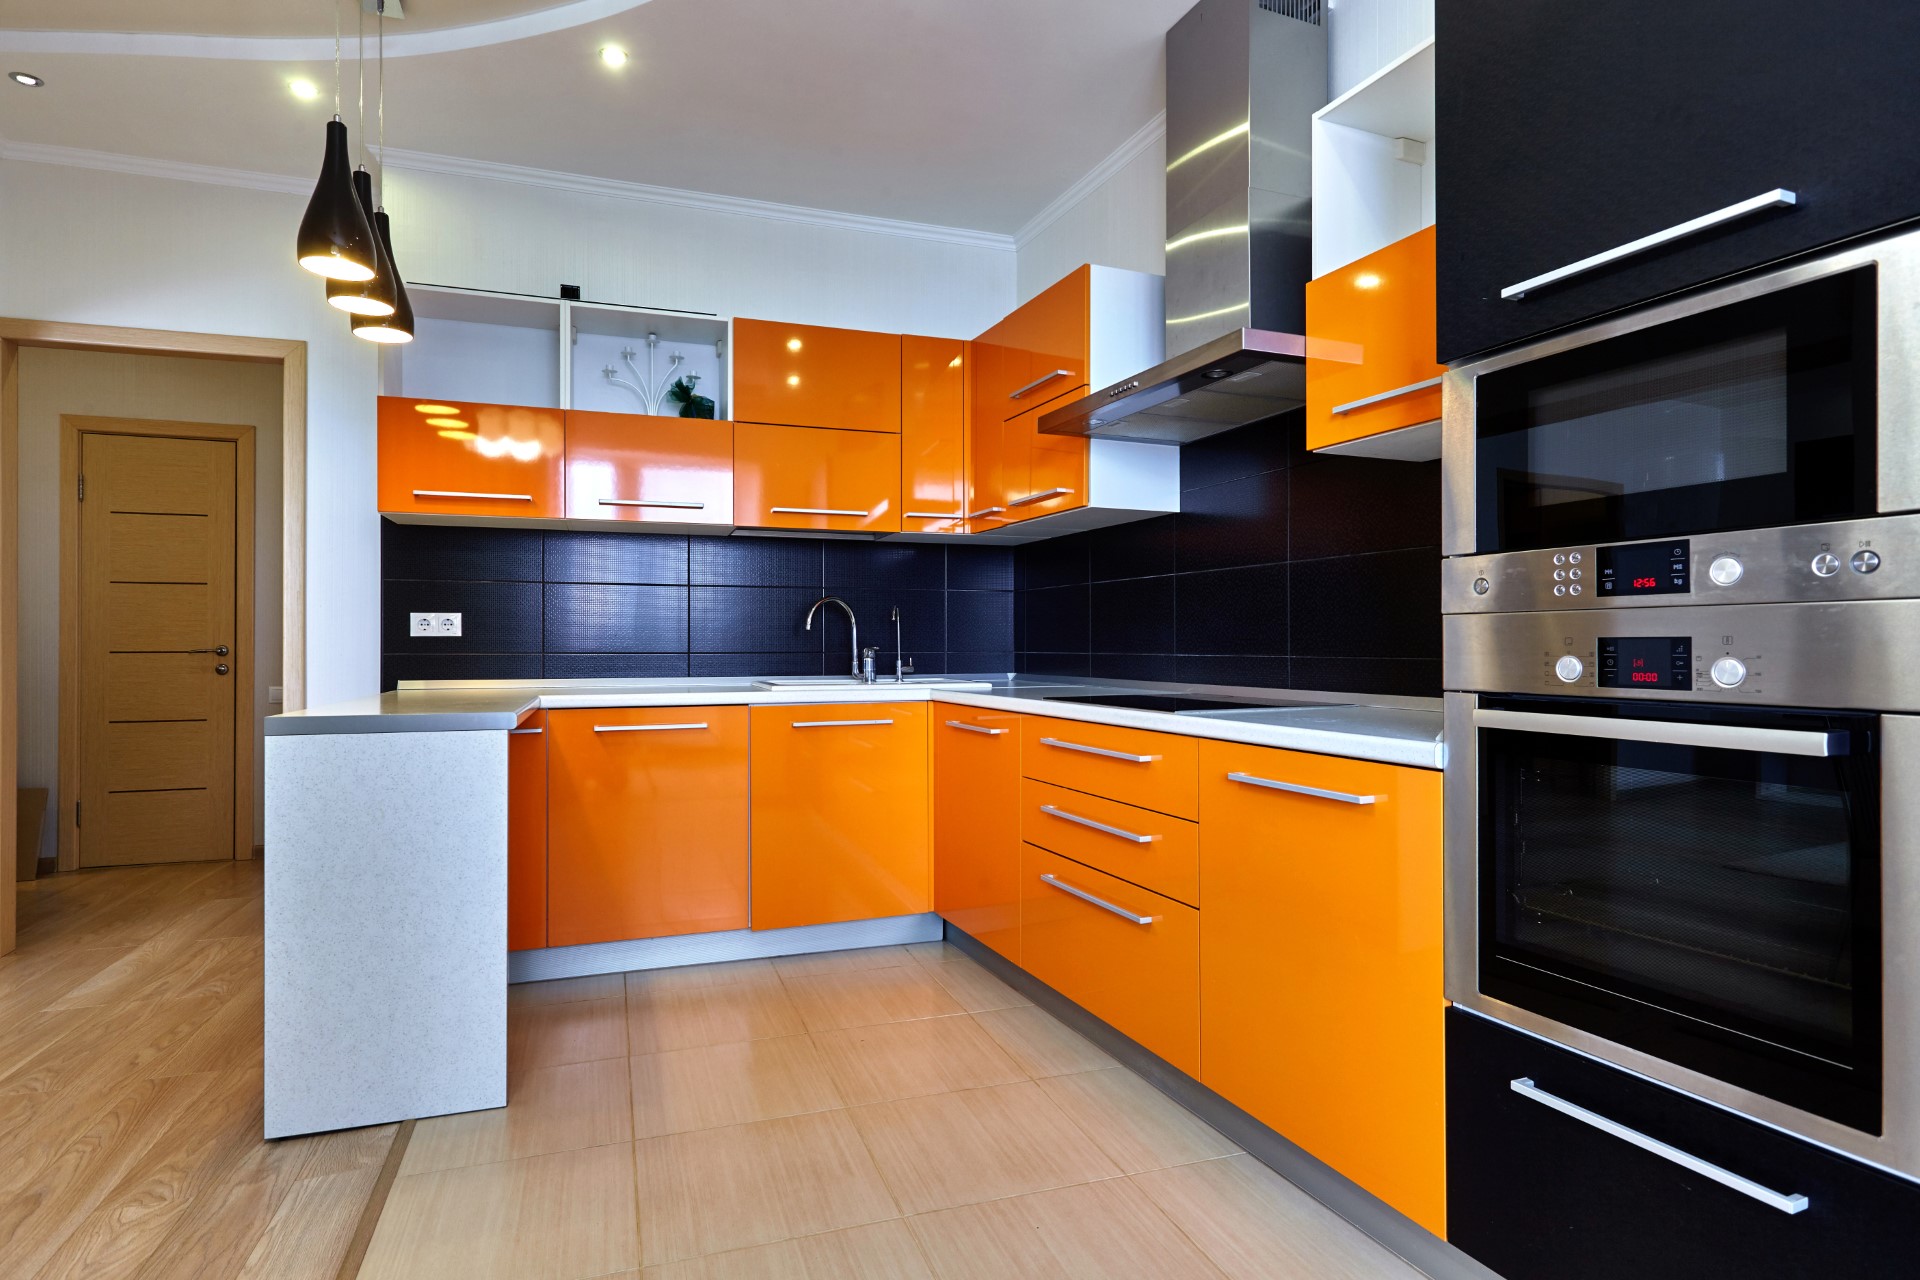 A bright orange kitchen is probably the thing you would least expect to see, but it's awesome! It's for the type of person who has no boundaries, and want something to become a centerpiece for their home. Definitely the type of abstract decoration I would bring to my home.